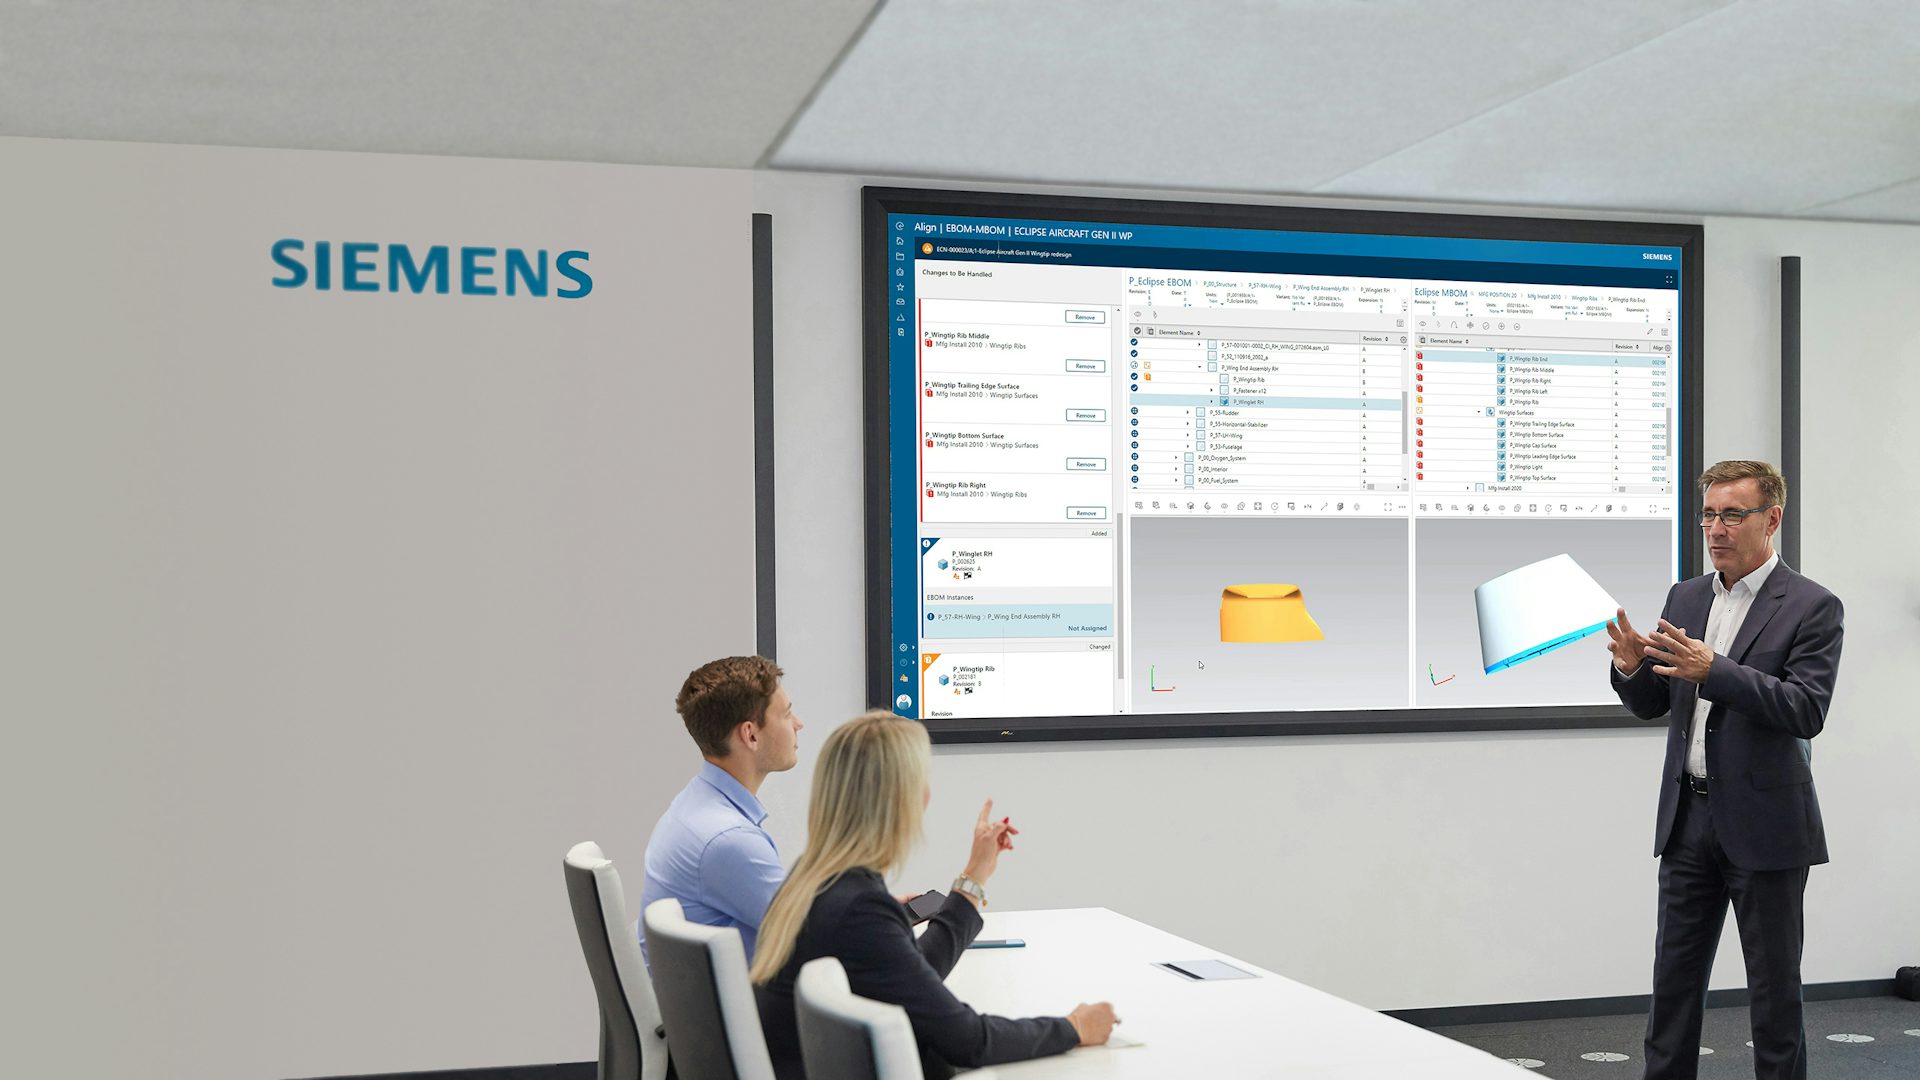 Three manufacturing planners review a process plan using Siemens software on a large screen in a meeting room.